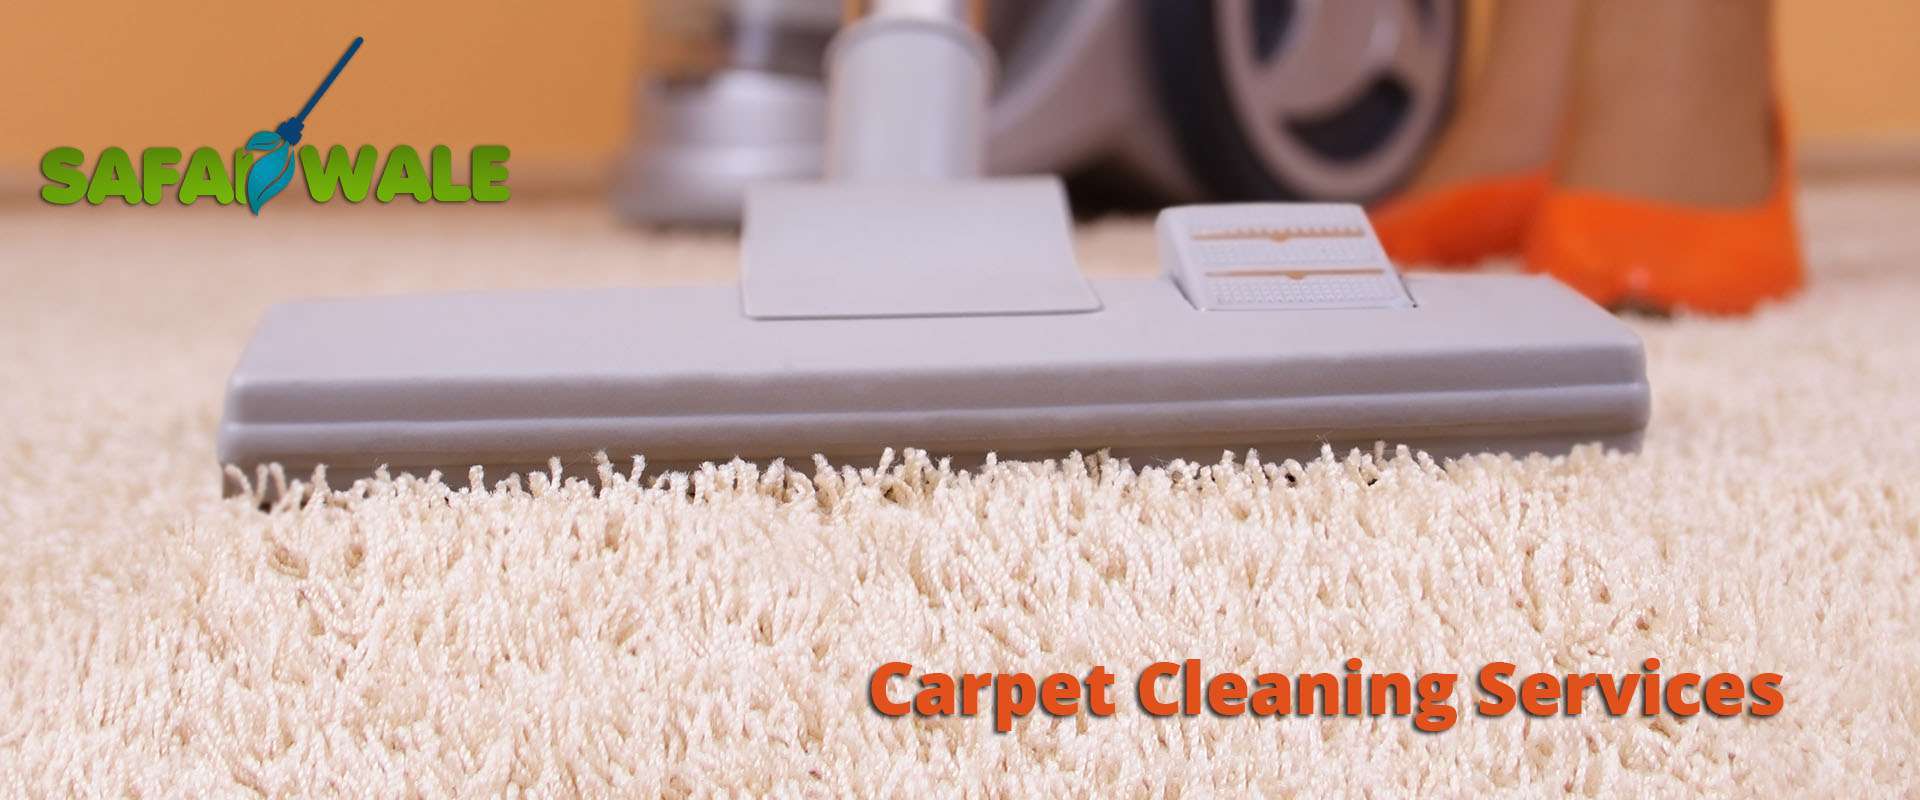 Carpet Cleaning Services In Sector 9, Chandigarh